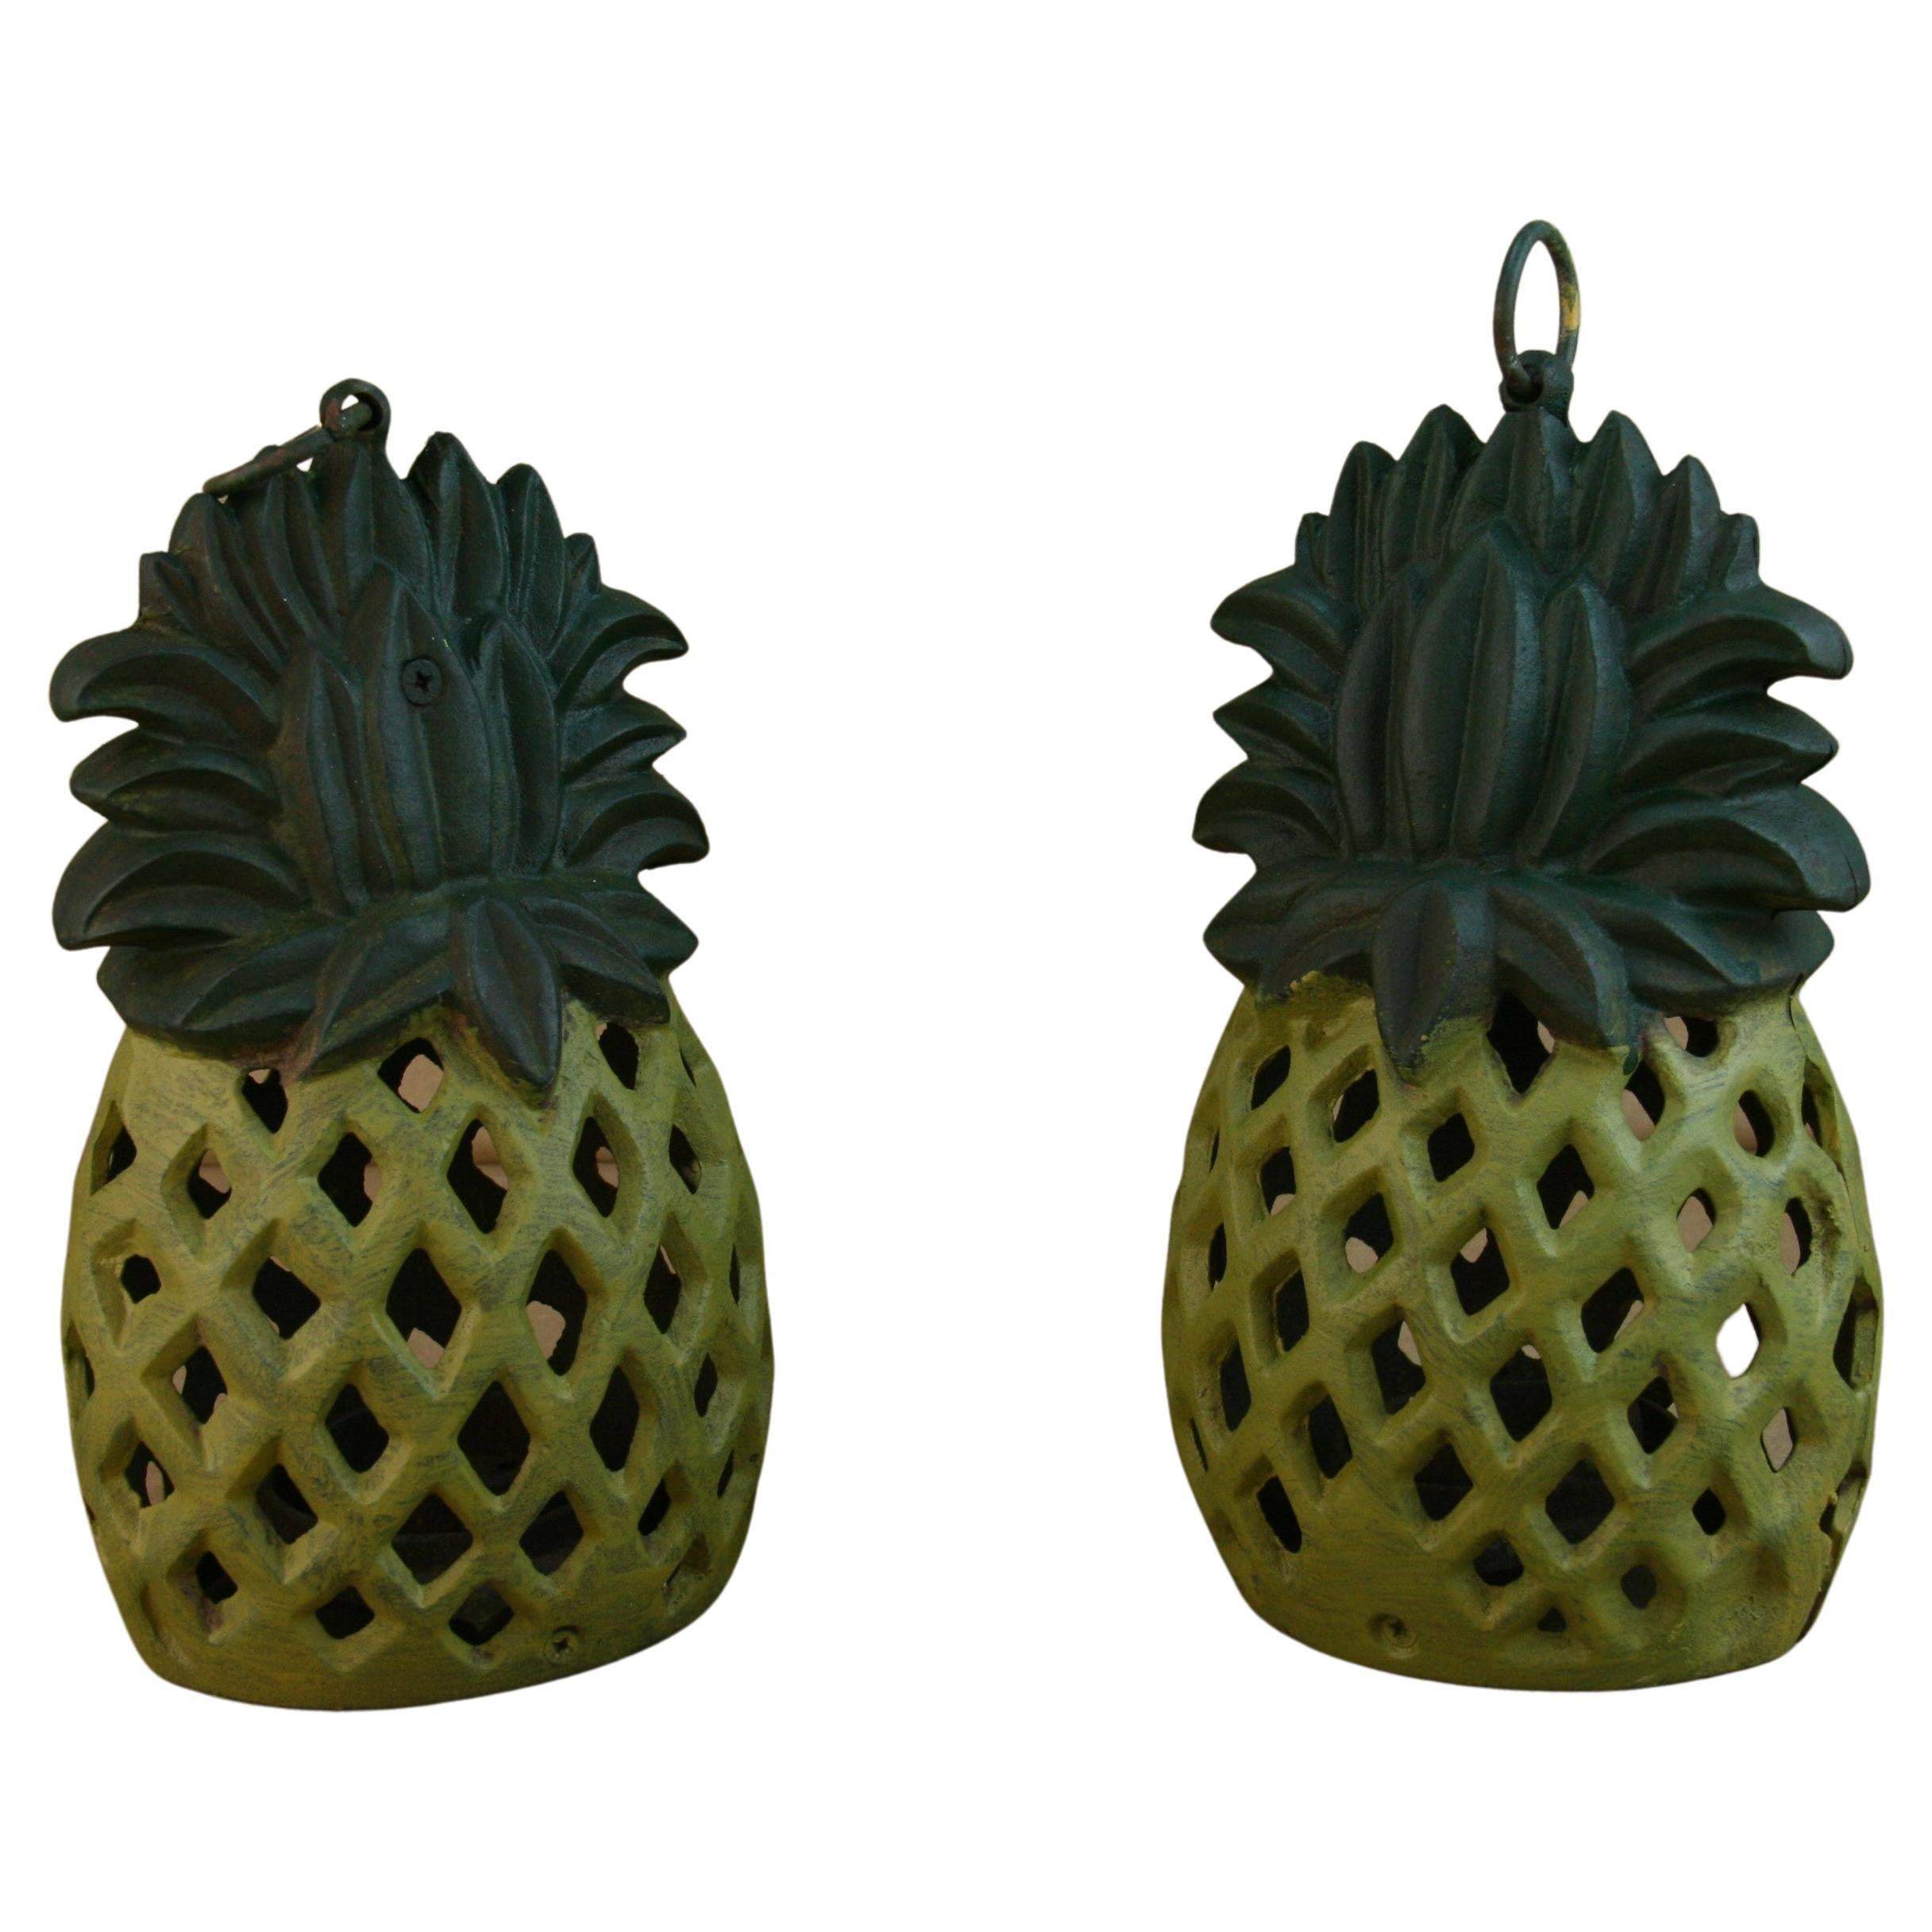 3-980 Japanese antique pair hand painted pineapple garden candle lanterns
Sold individually at $325 each